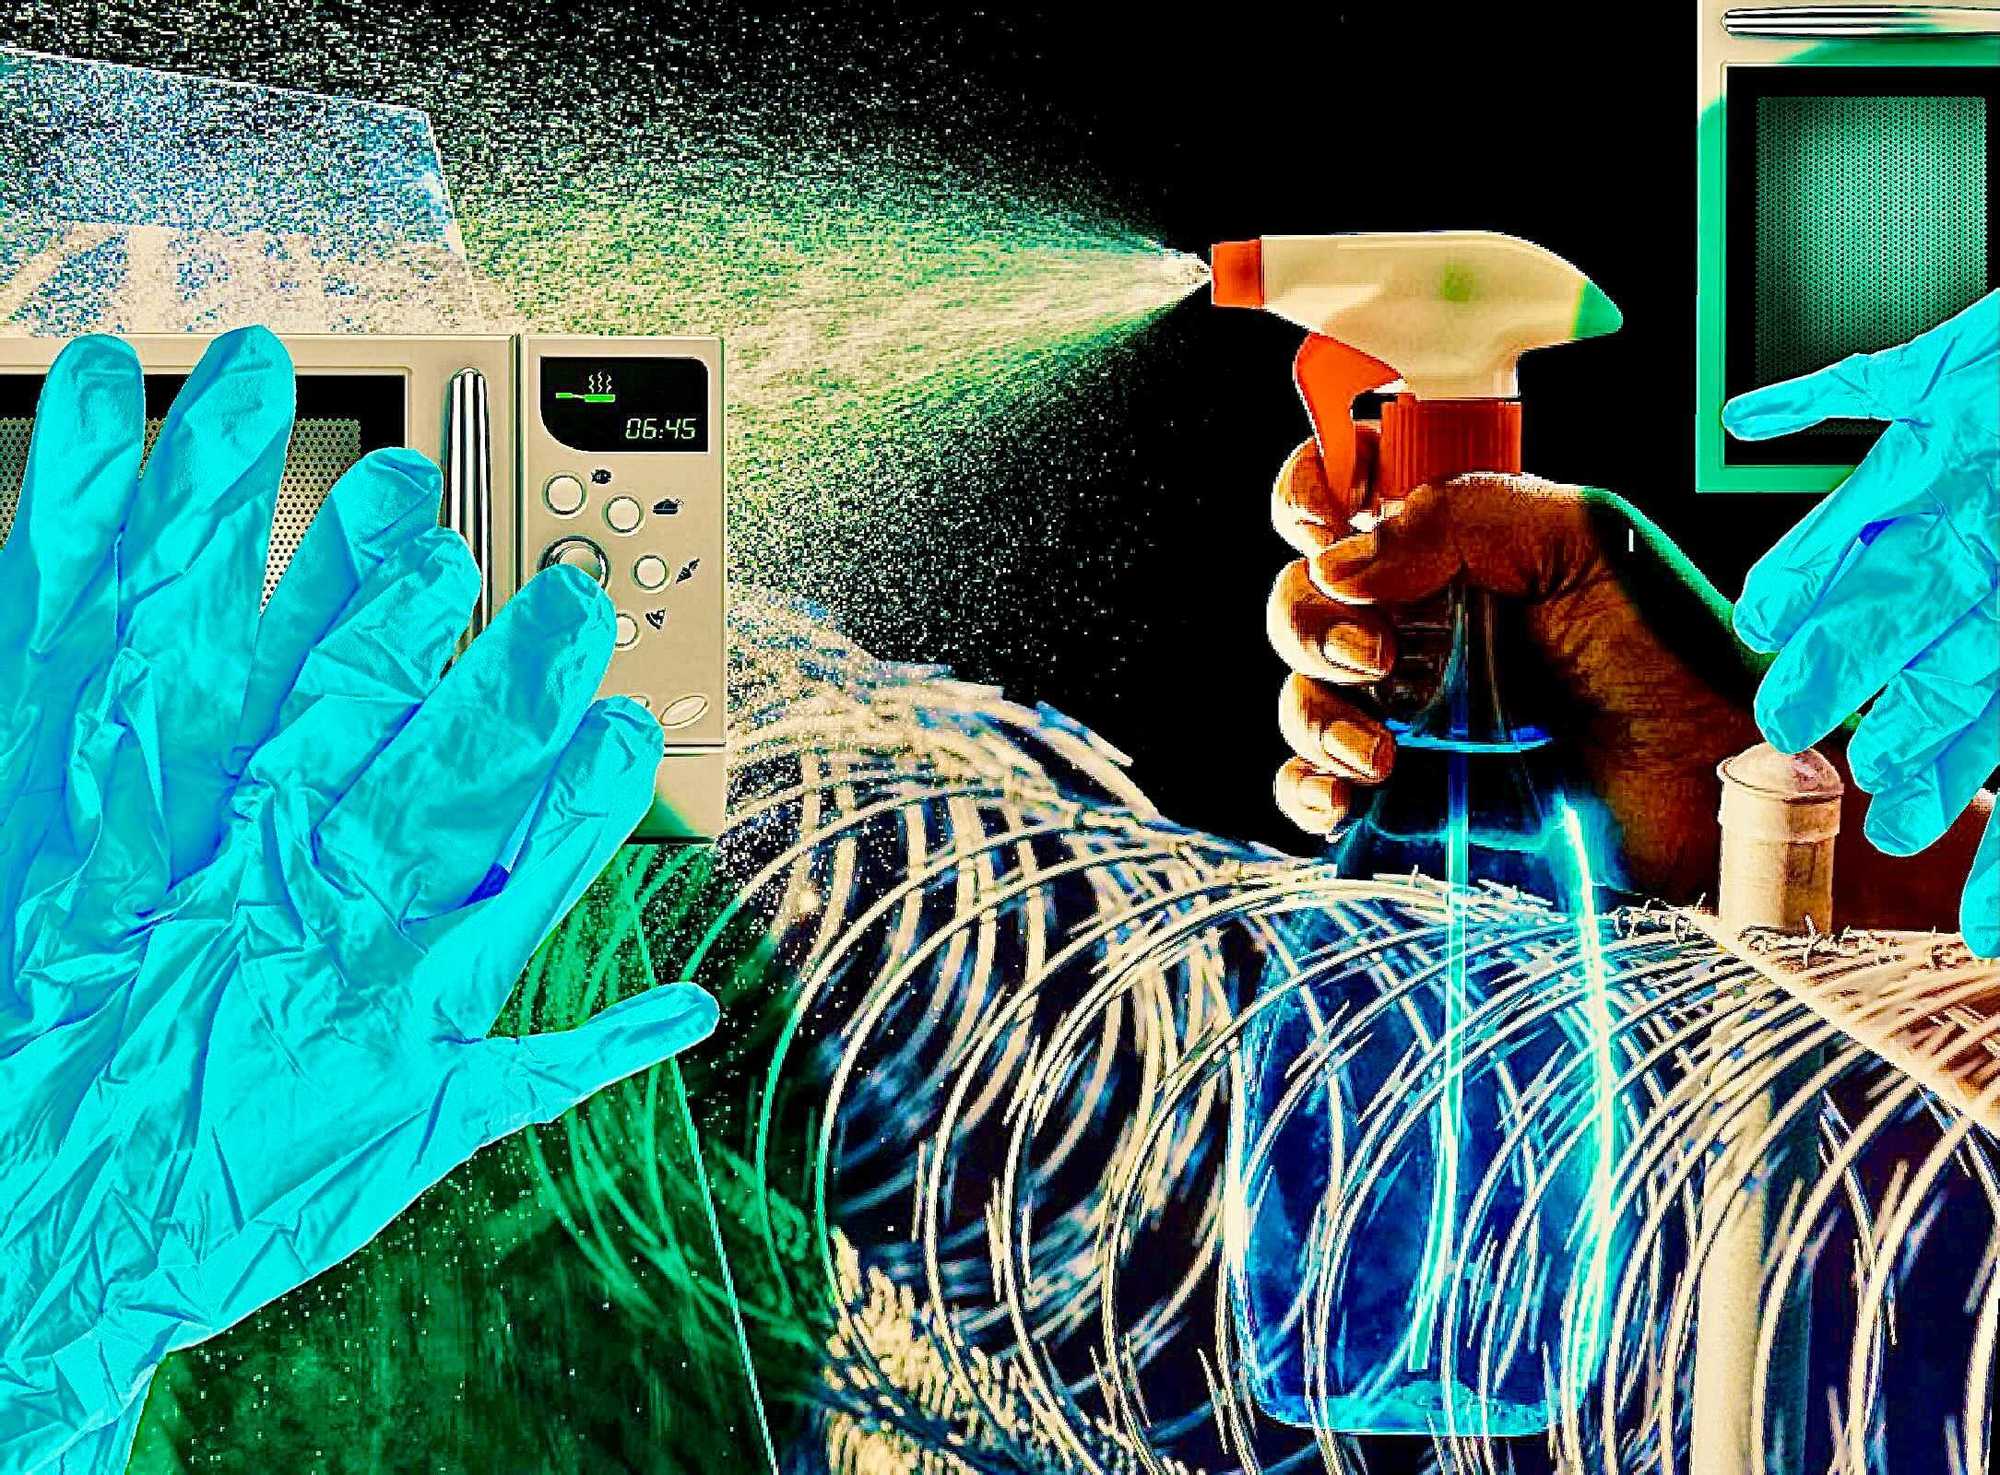 Collage of a hand holding spray bottle with microwave and wire fencing. August 2021